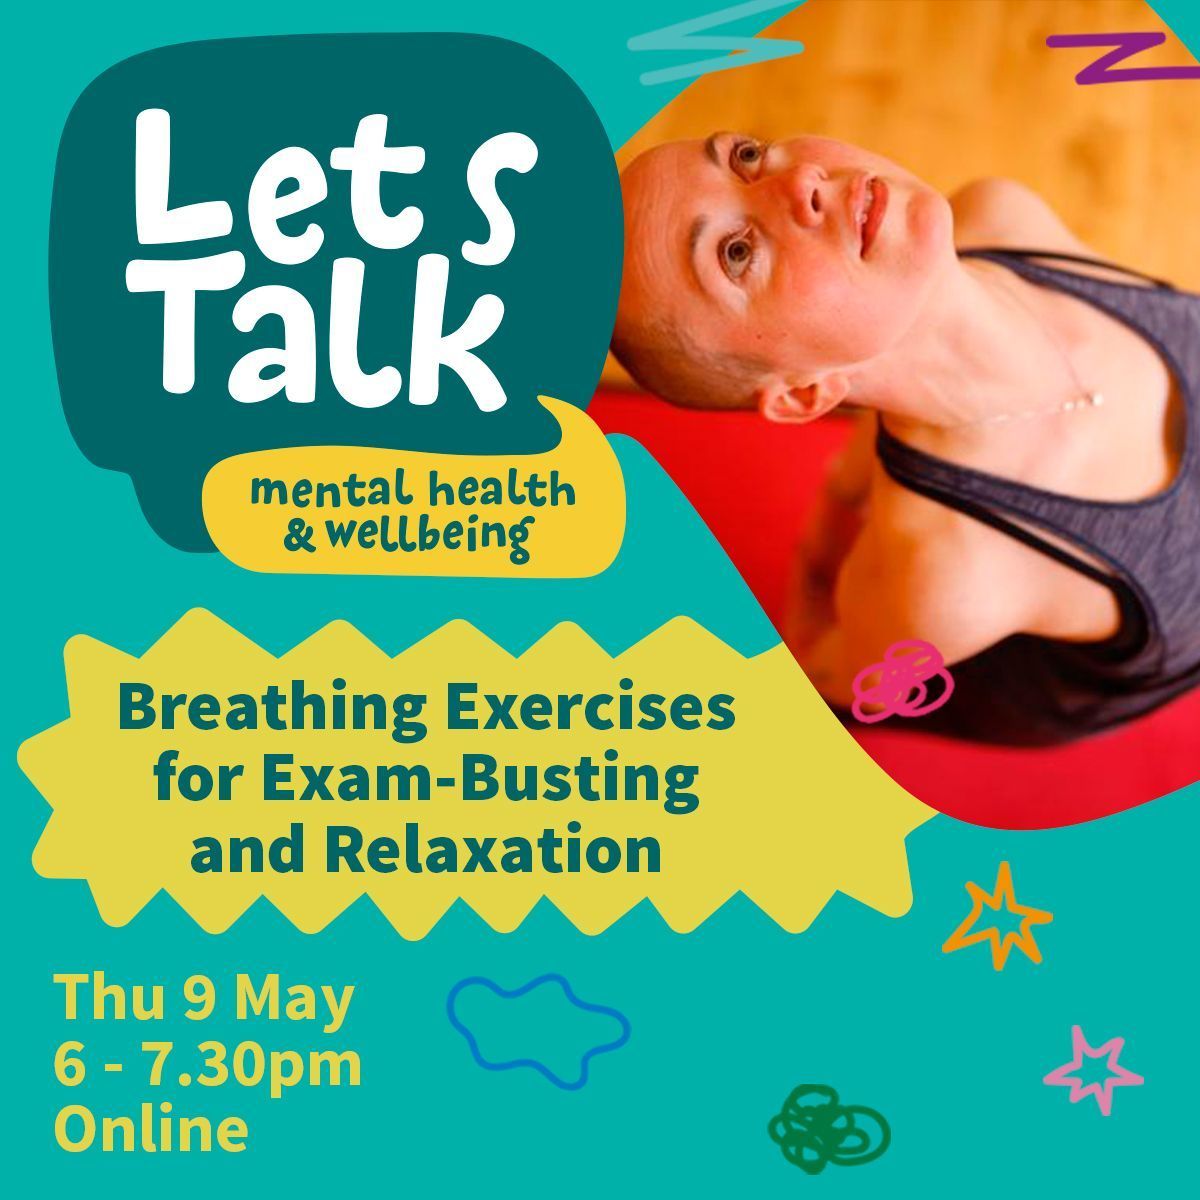 ⏰ With exams and term assignments here for many, stress seems inevitable — but it doesn't have to be that way. Join this online session on Thursday 9 May for a free hour-long session on stress reduction and breathing exercises, led by a senior yoga teacher.